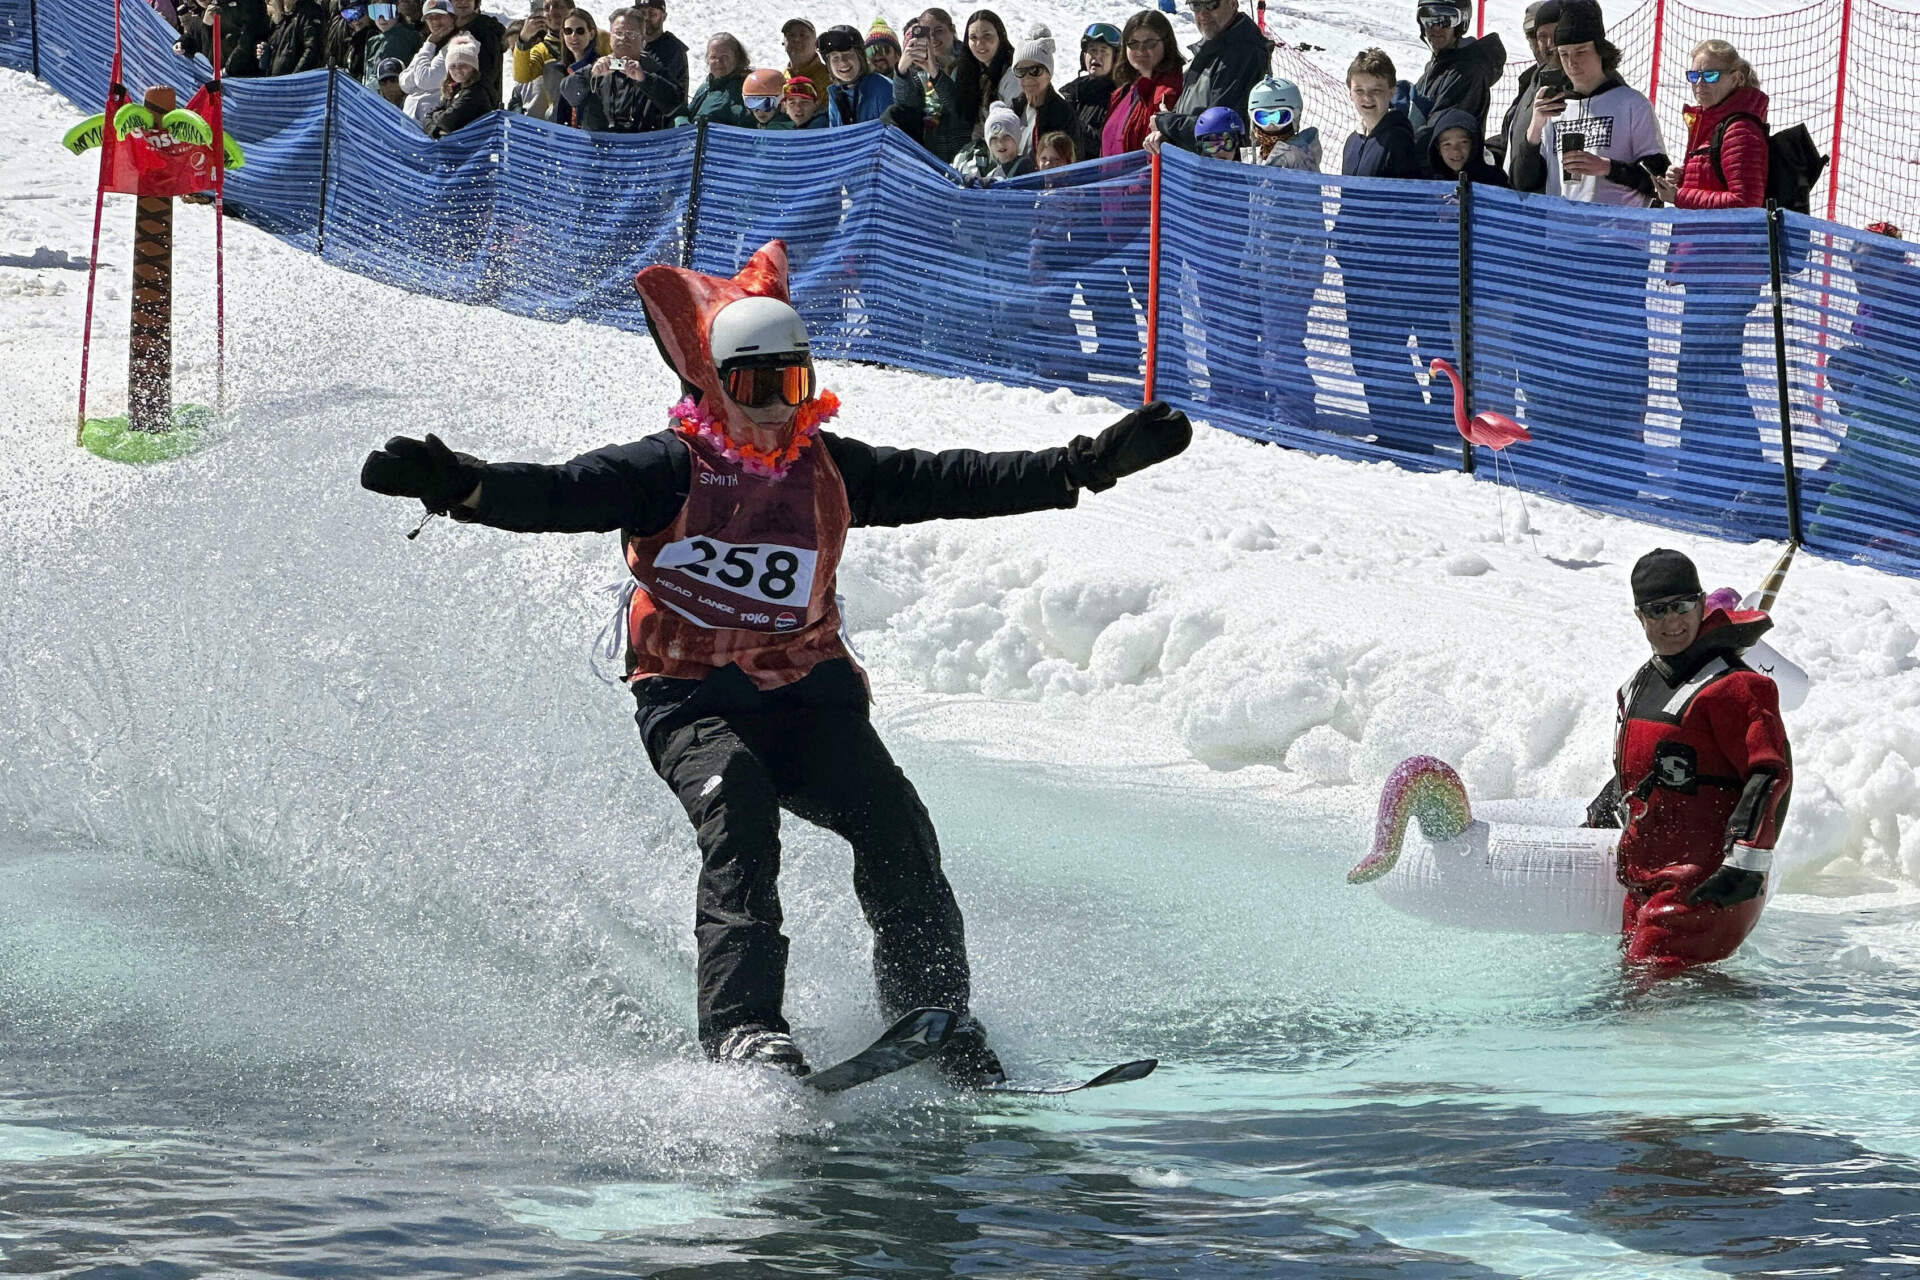 A skier participates in a pond skimming event in Gilford, N.H. (Nick Perry/AP)